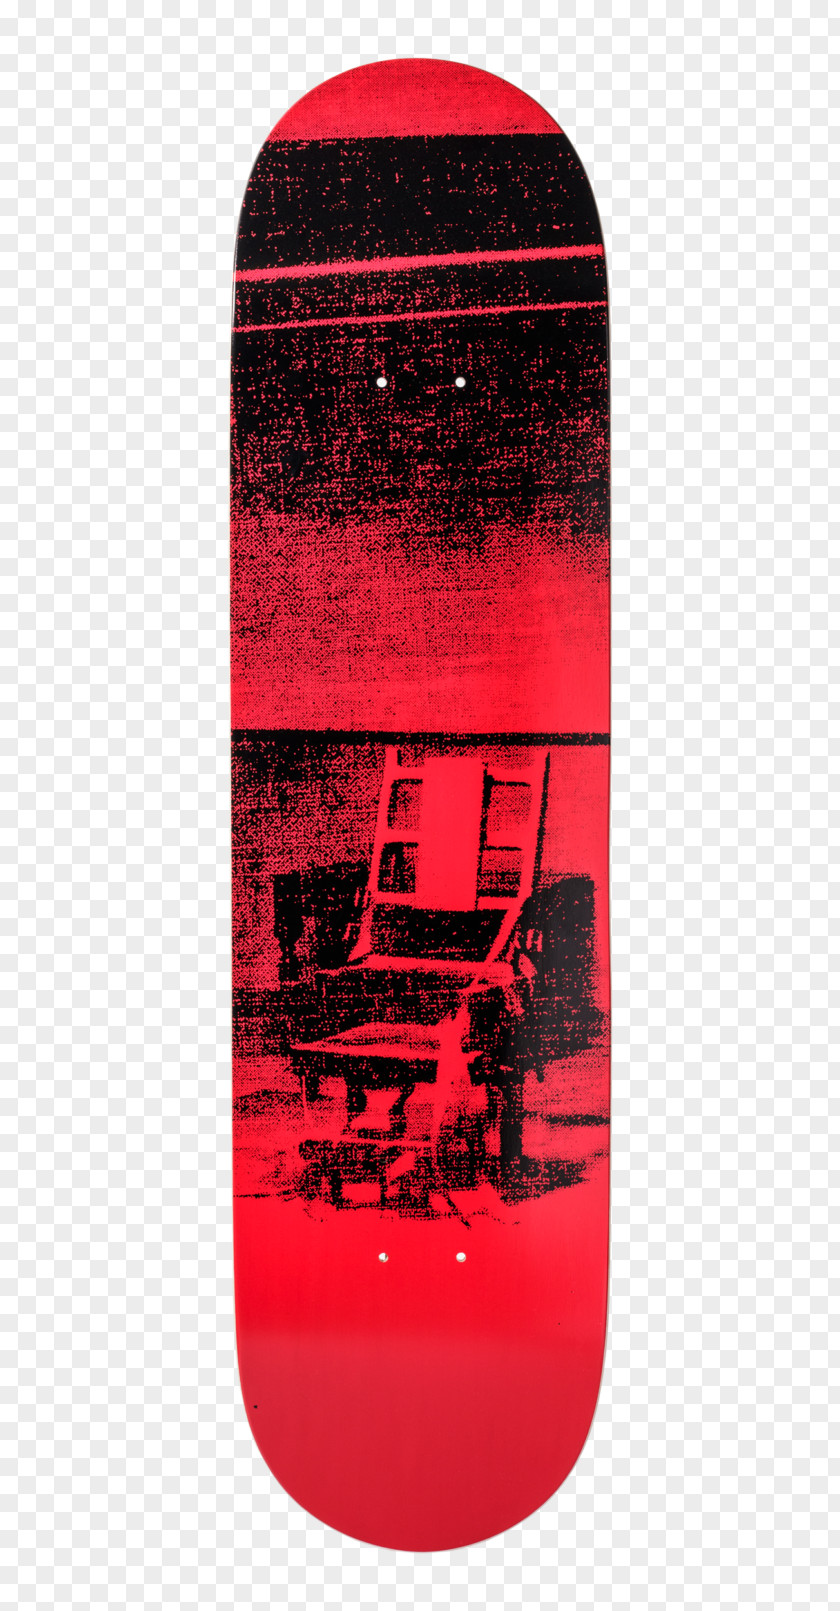 Andy Warhol Artist Electric Chair Automotive Tail & Brake Light Electricity PNG